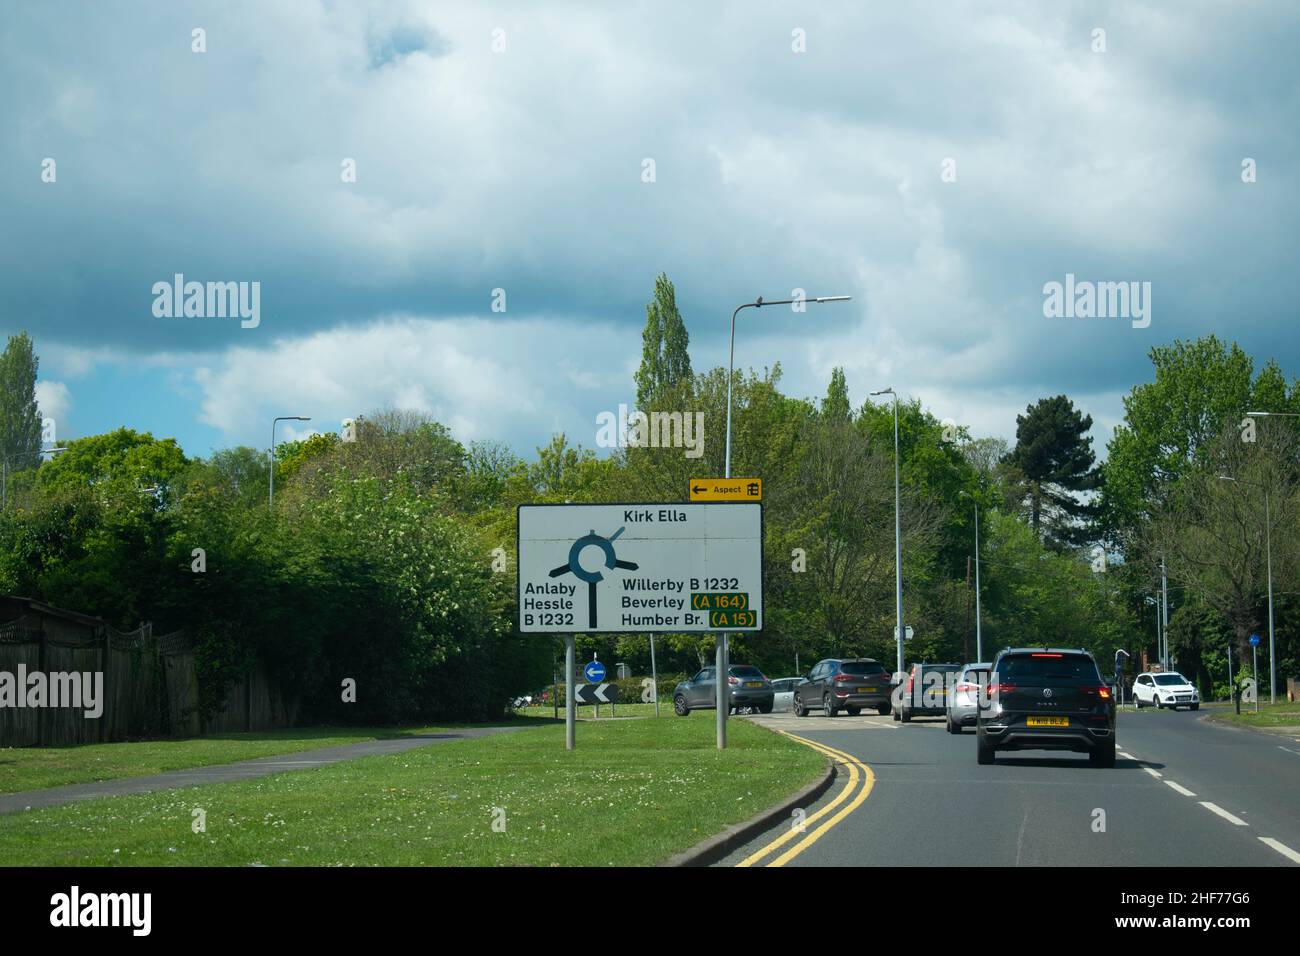 Road sign on street directing to Humber Bridge, Beverley, Willerby, Kirk Ella, Anlaby and Hessle in Kingston upon Hull, East Yorkshire City of Culture Stock Photo